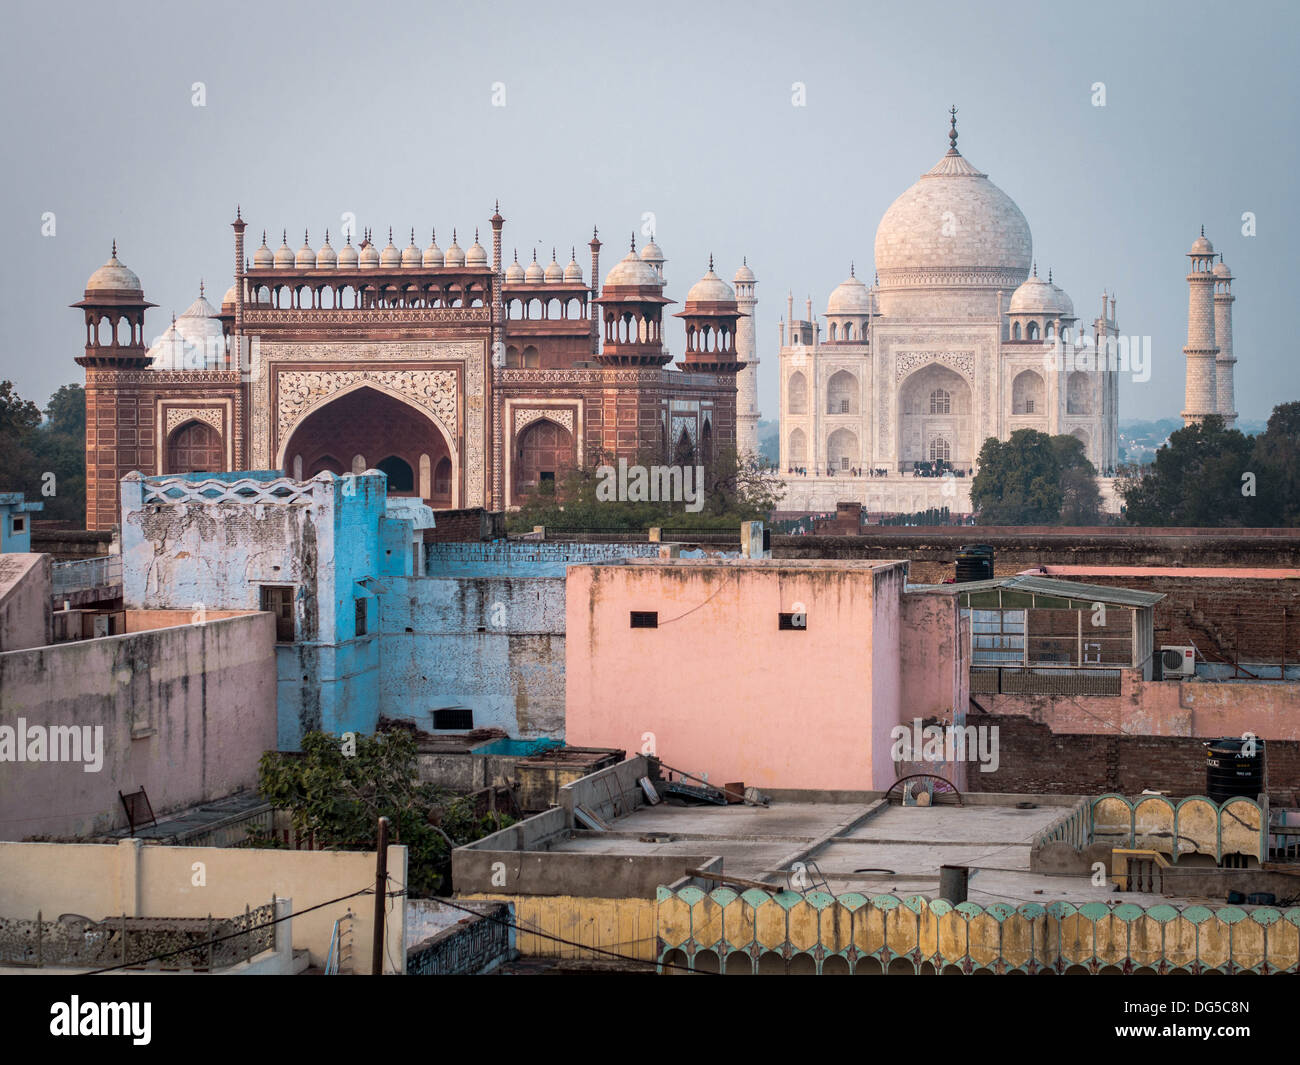 The Taj Mahal seen from a nearby rooftop in Agra, India. Stock Photo